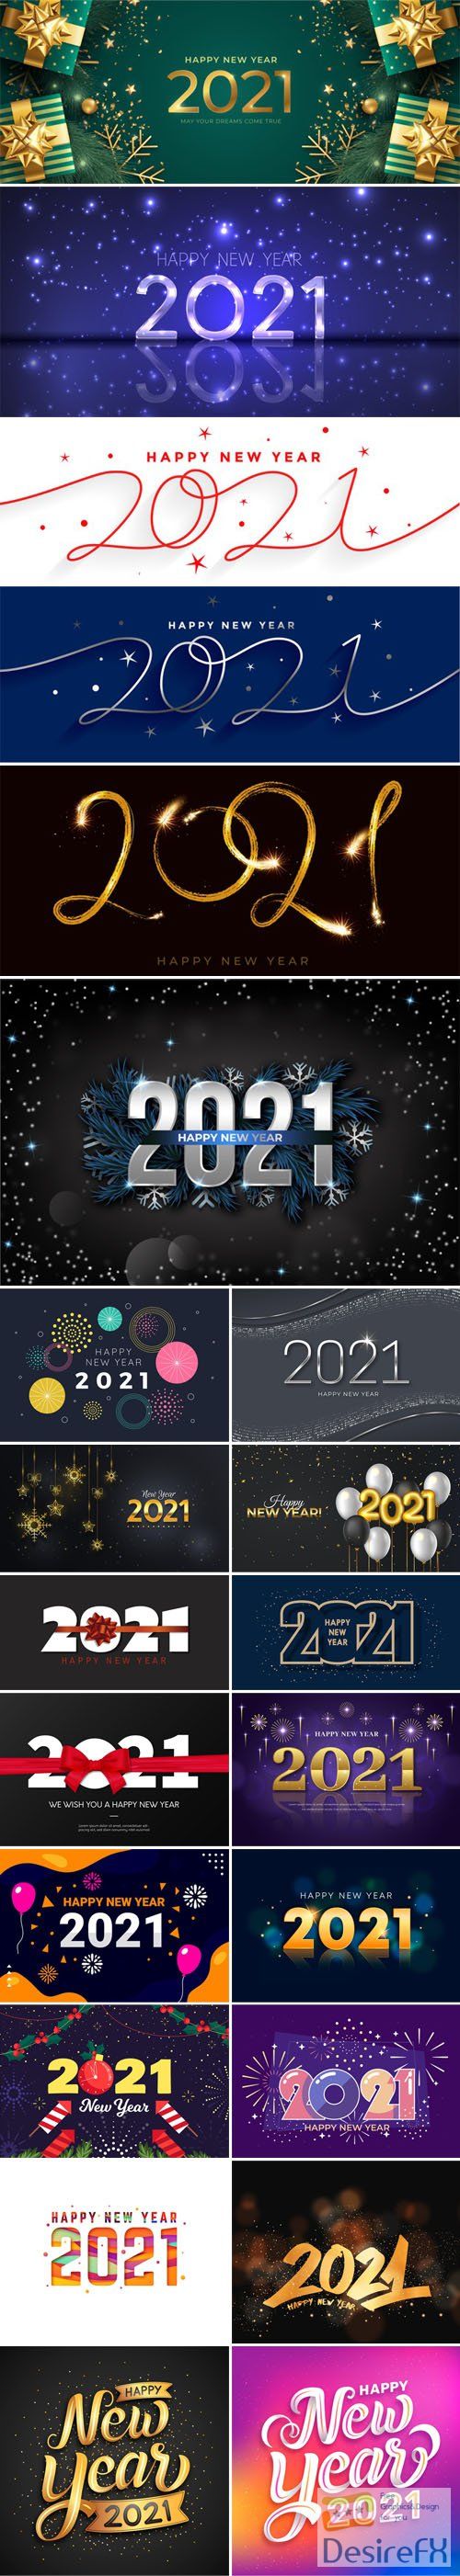 23 Happy New Year 2021 Backgrounds & Lettering Templates in Vector